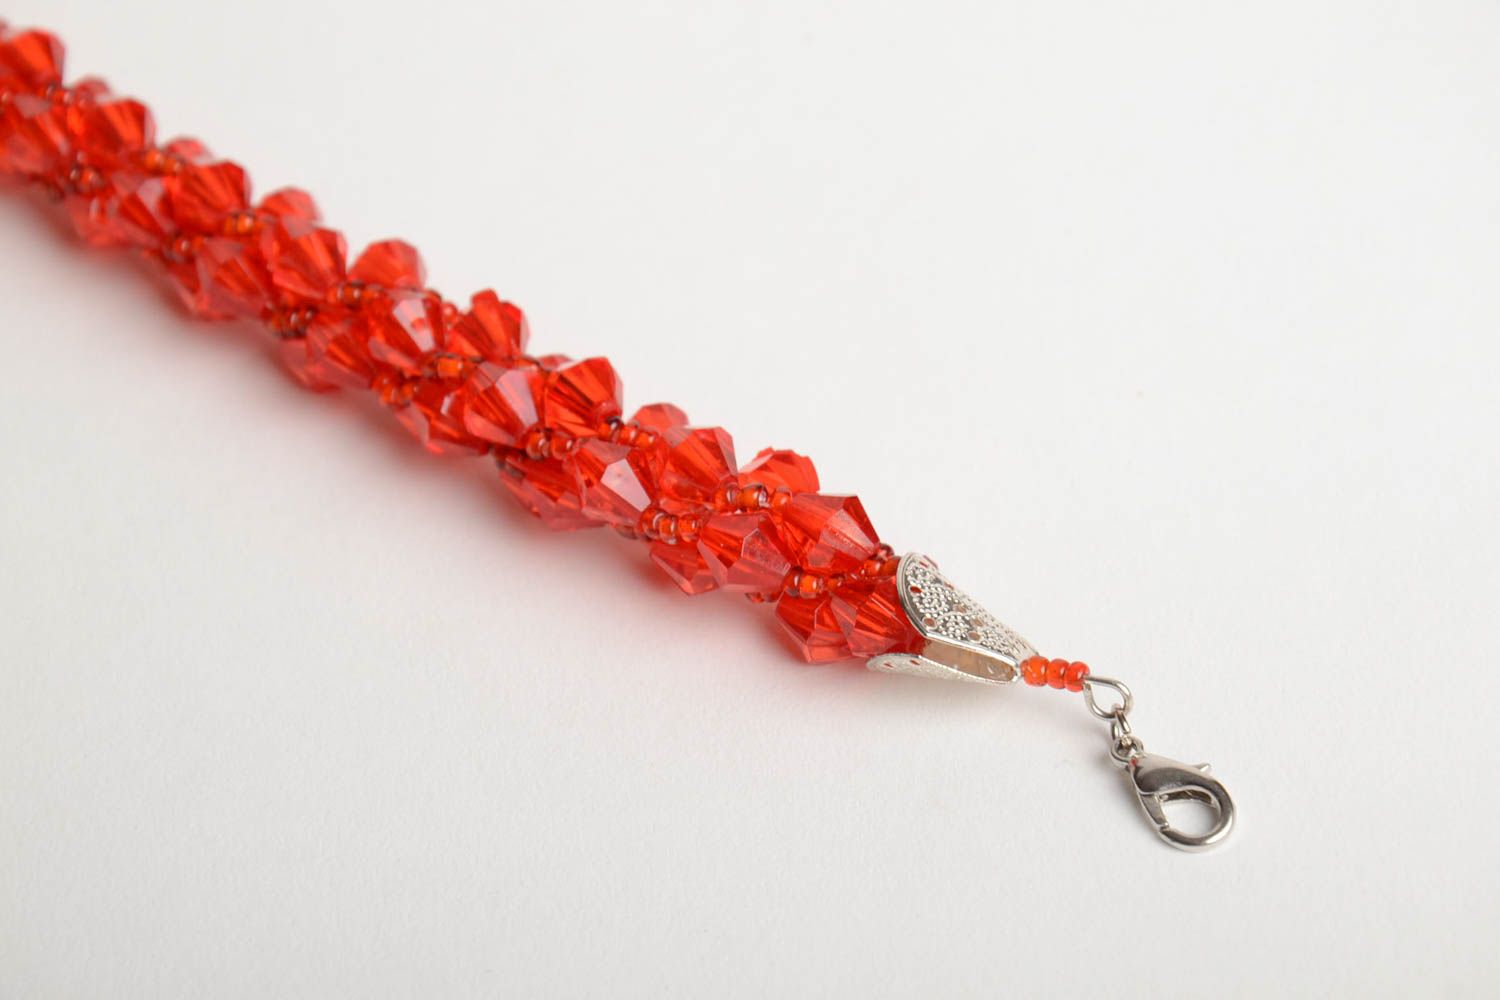 Handmade wrist bracelet crocheted of red Czech seed beads and faceted beads photo 5